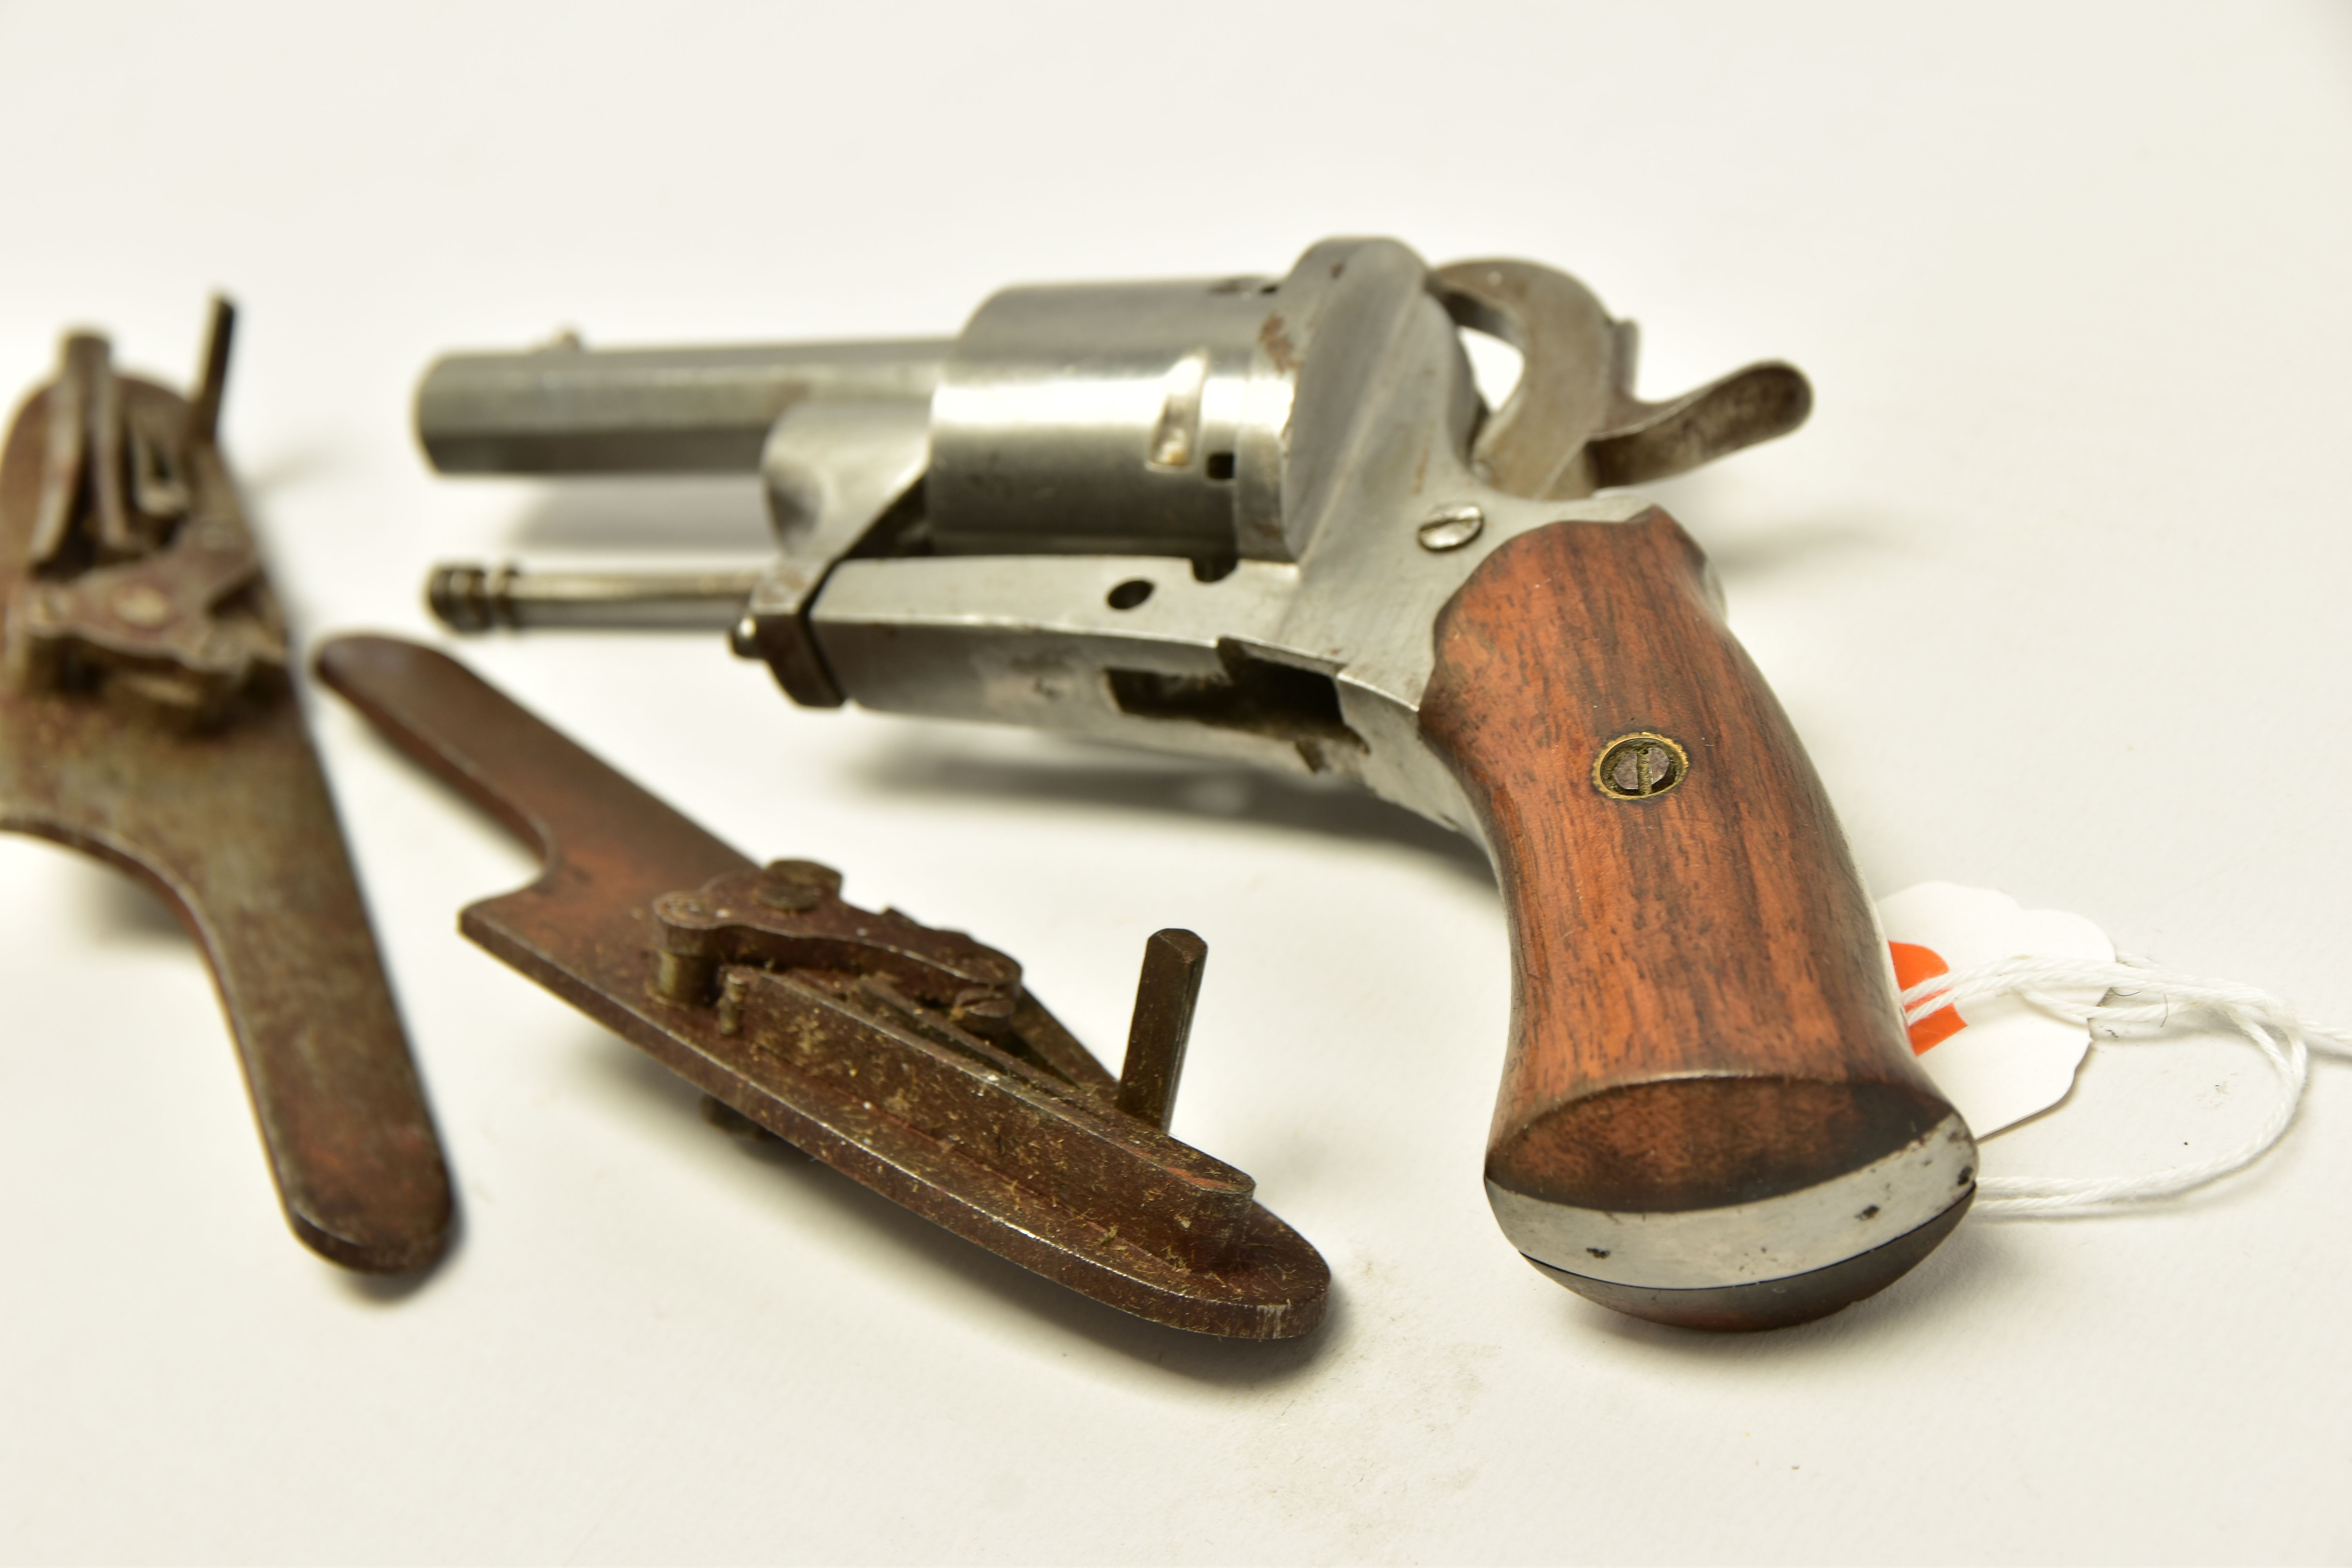 AN ANTIQUE 7MM BELGIAN PROVED PIN-FIRE REVOLVER, partly dismantled and missing its loading gate - Image 3 of 7